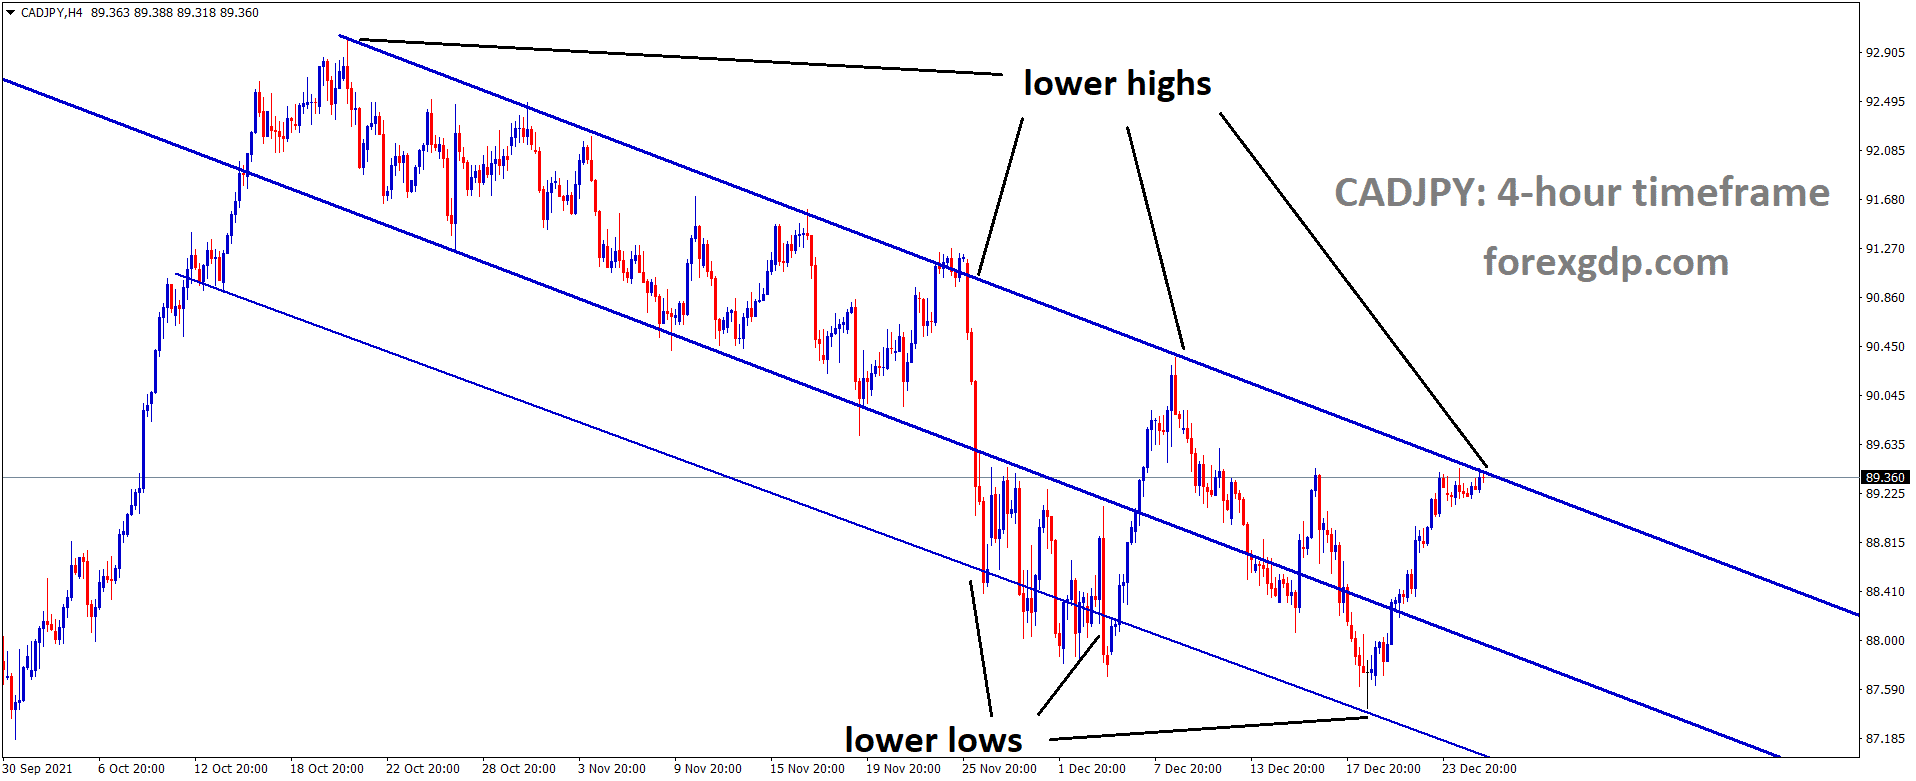 CADJPY is moving in the Descending channel and the market has reached the lower high area of the channel